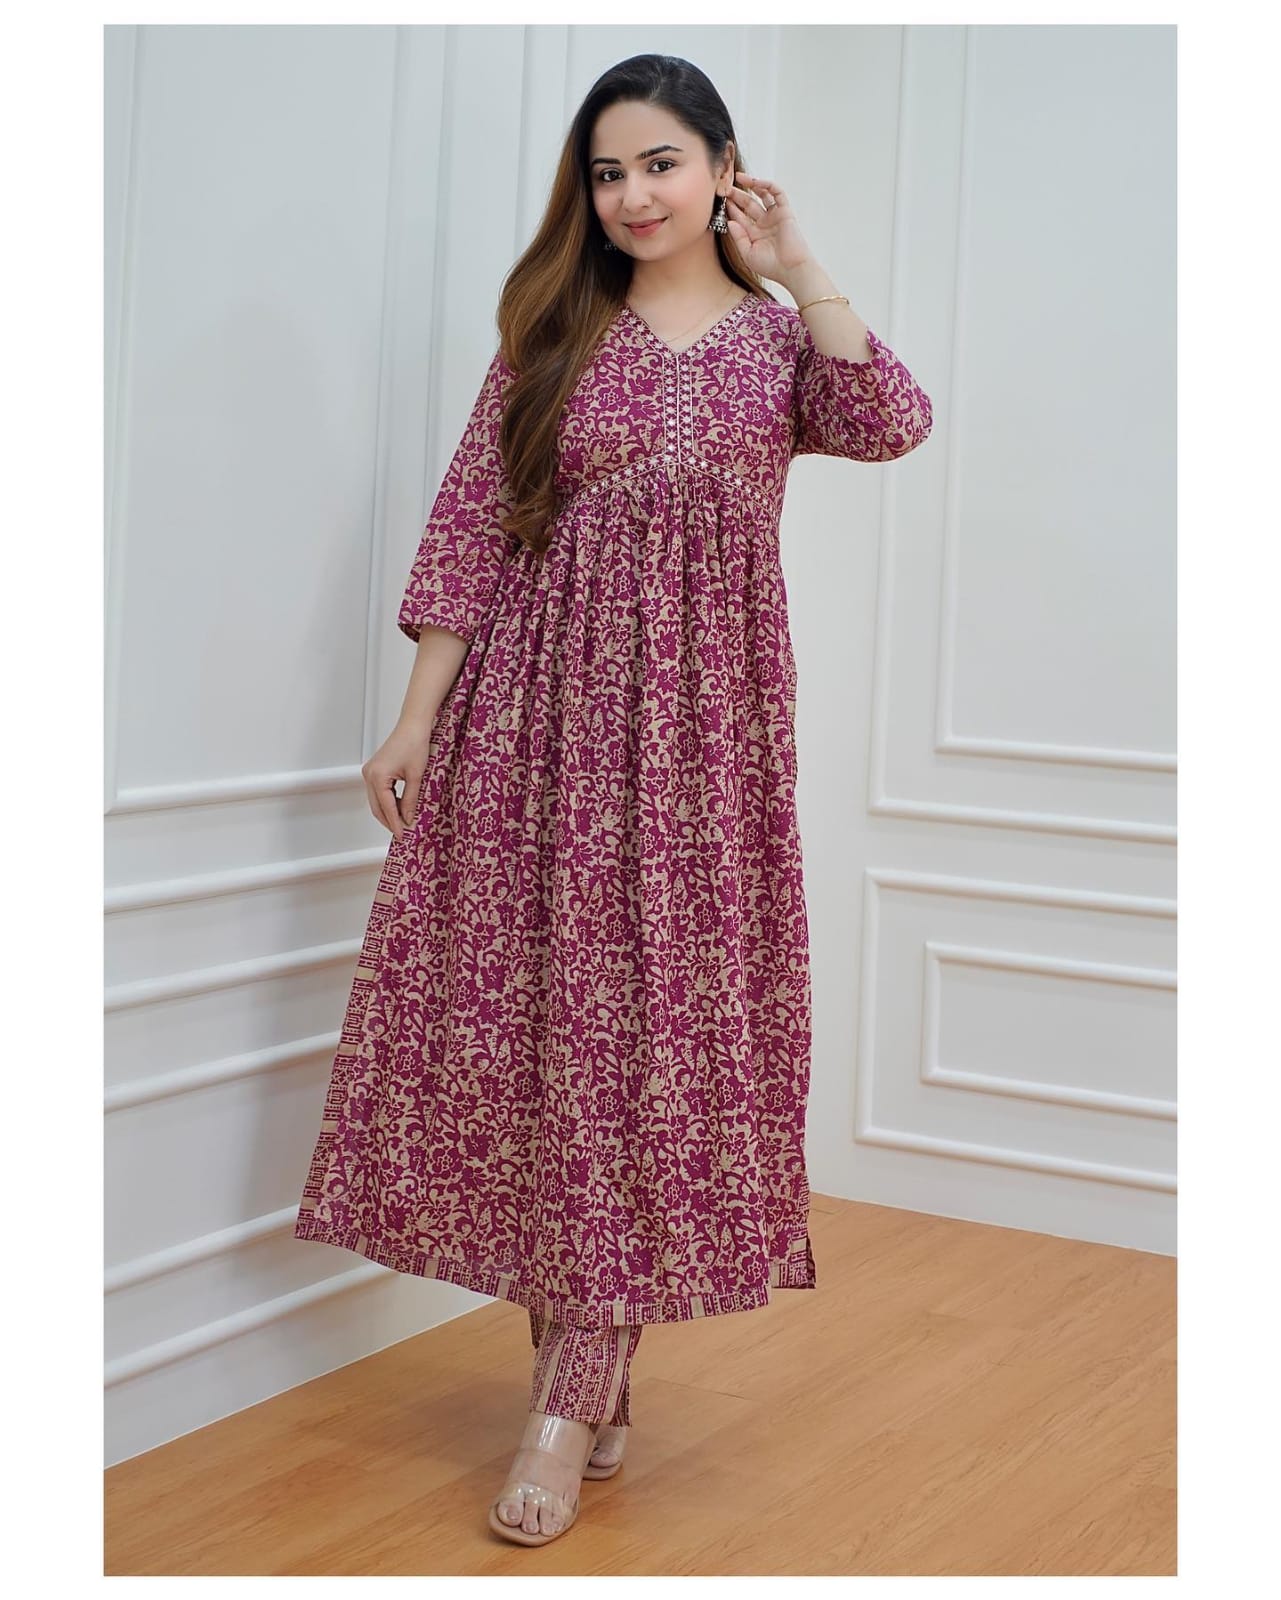 Buy Latest Indian Pink Gown dress Online Shopping For Women